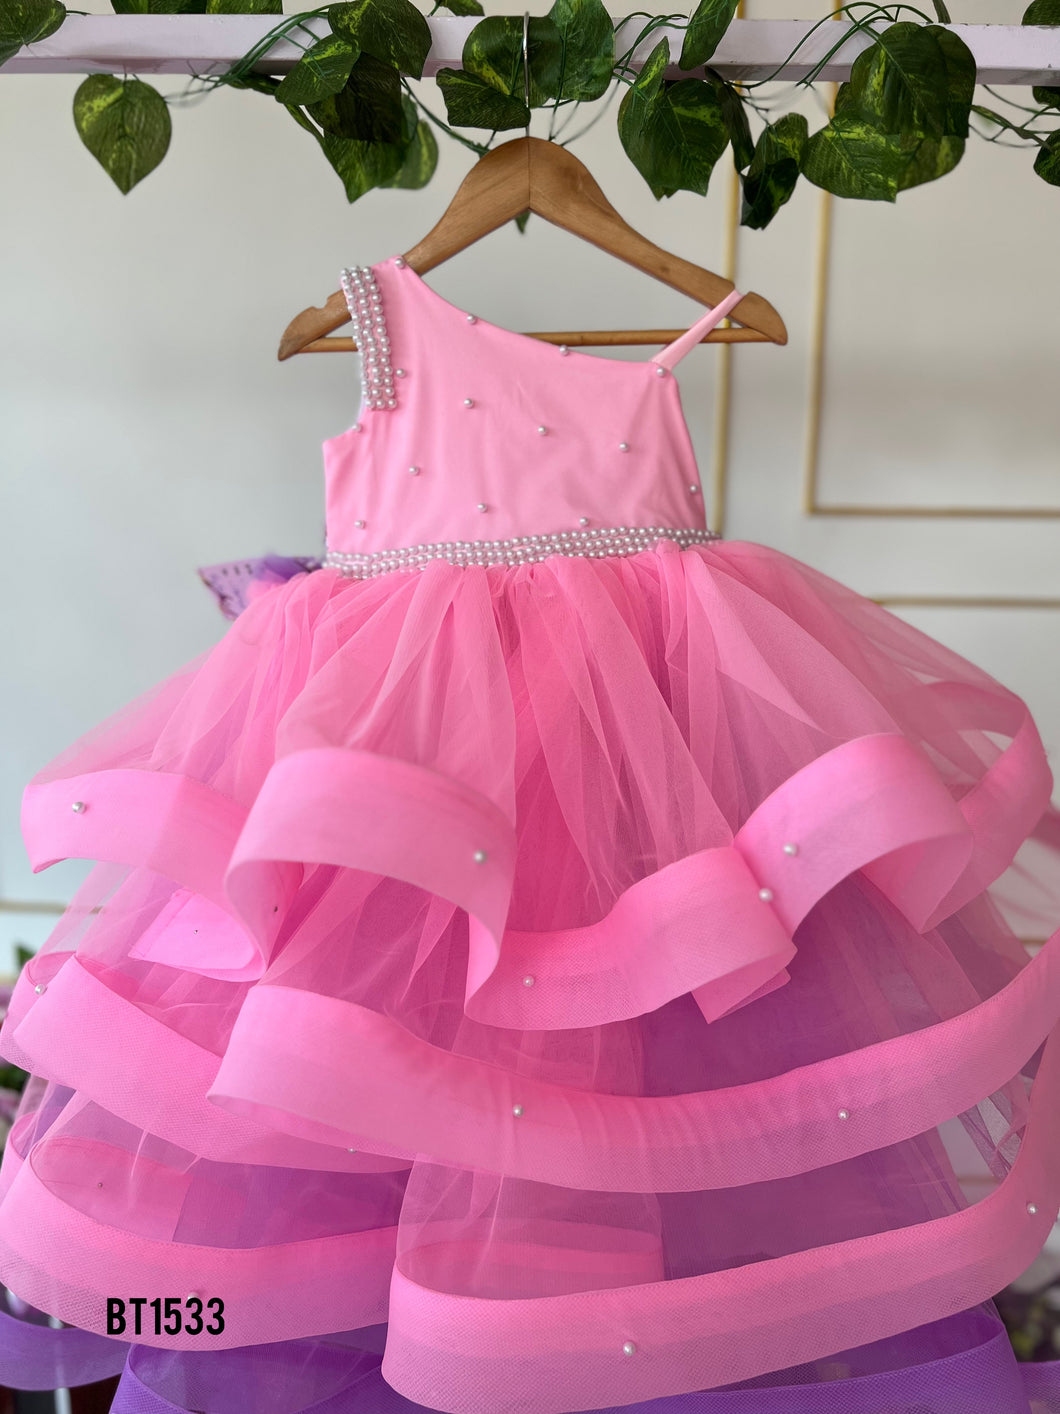 BT1533 Princess Peony Whirl Baby Party Frock